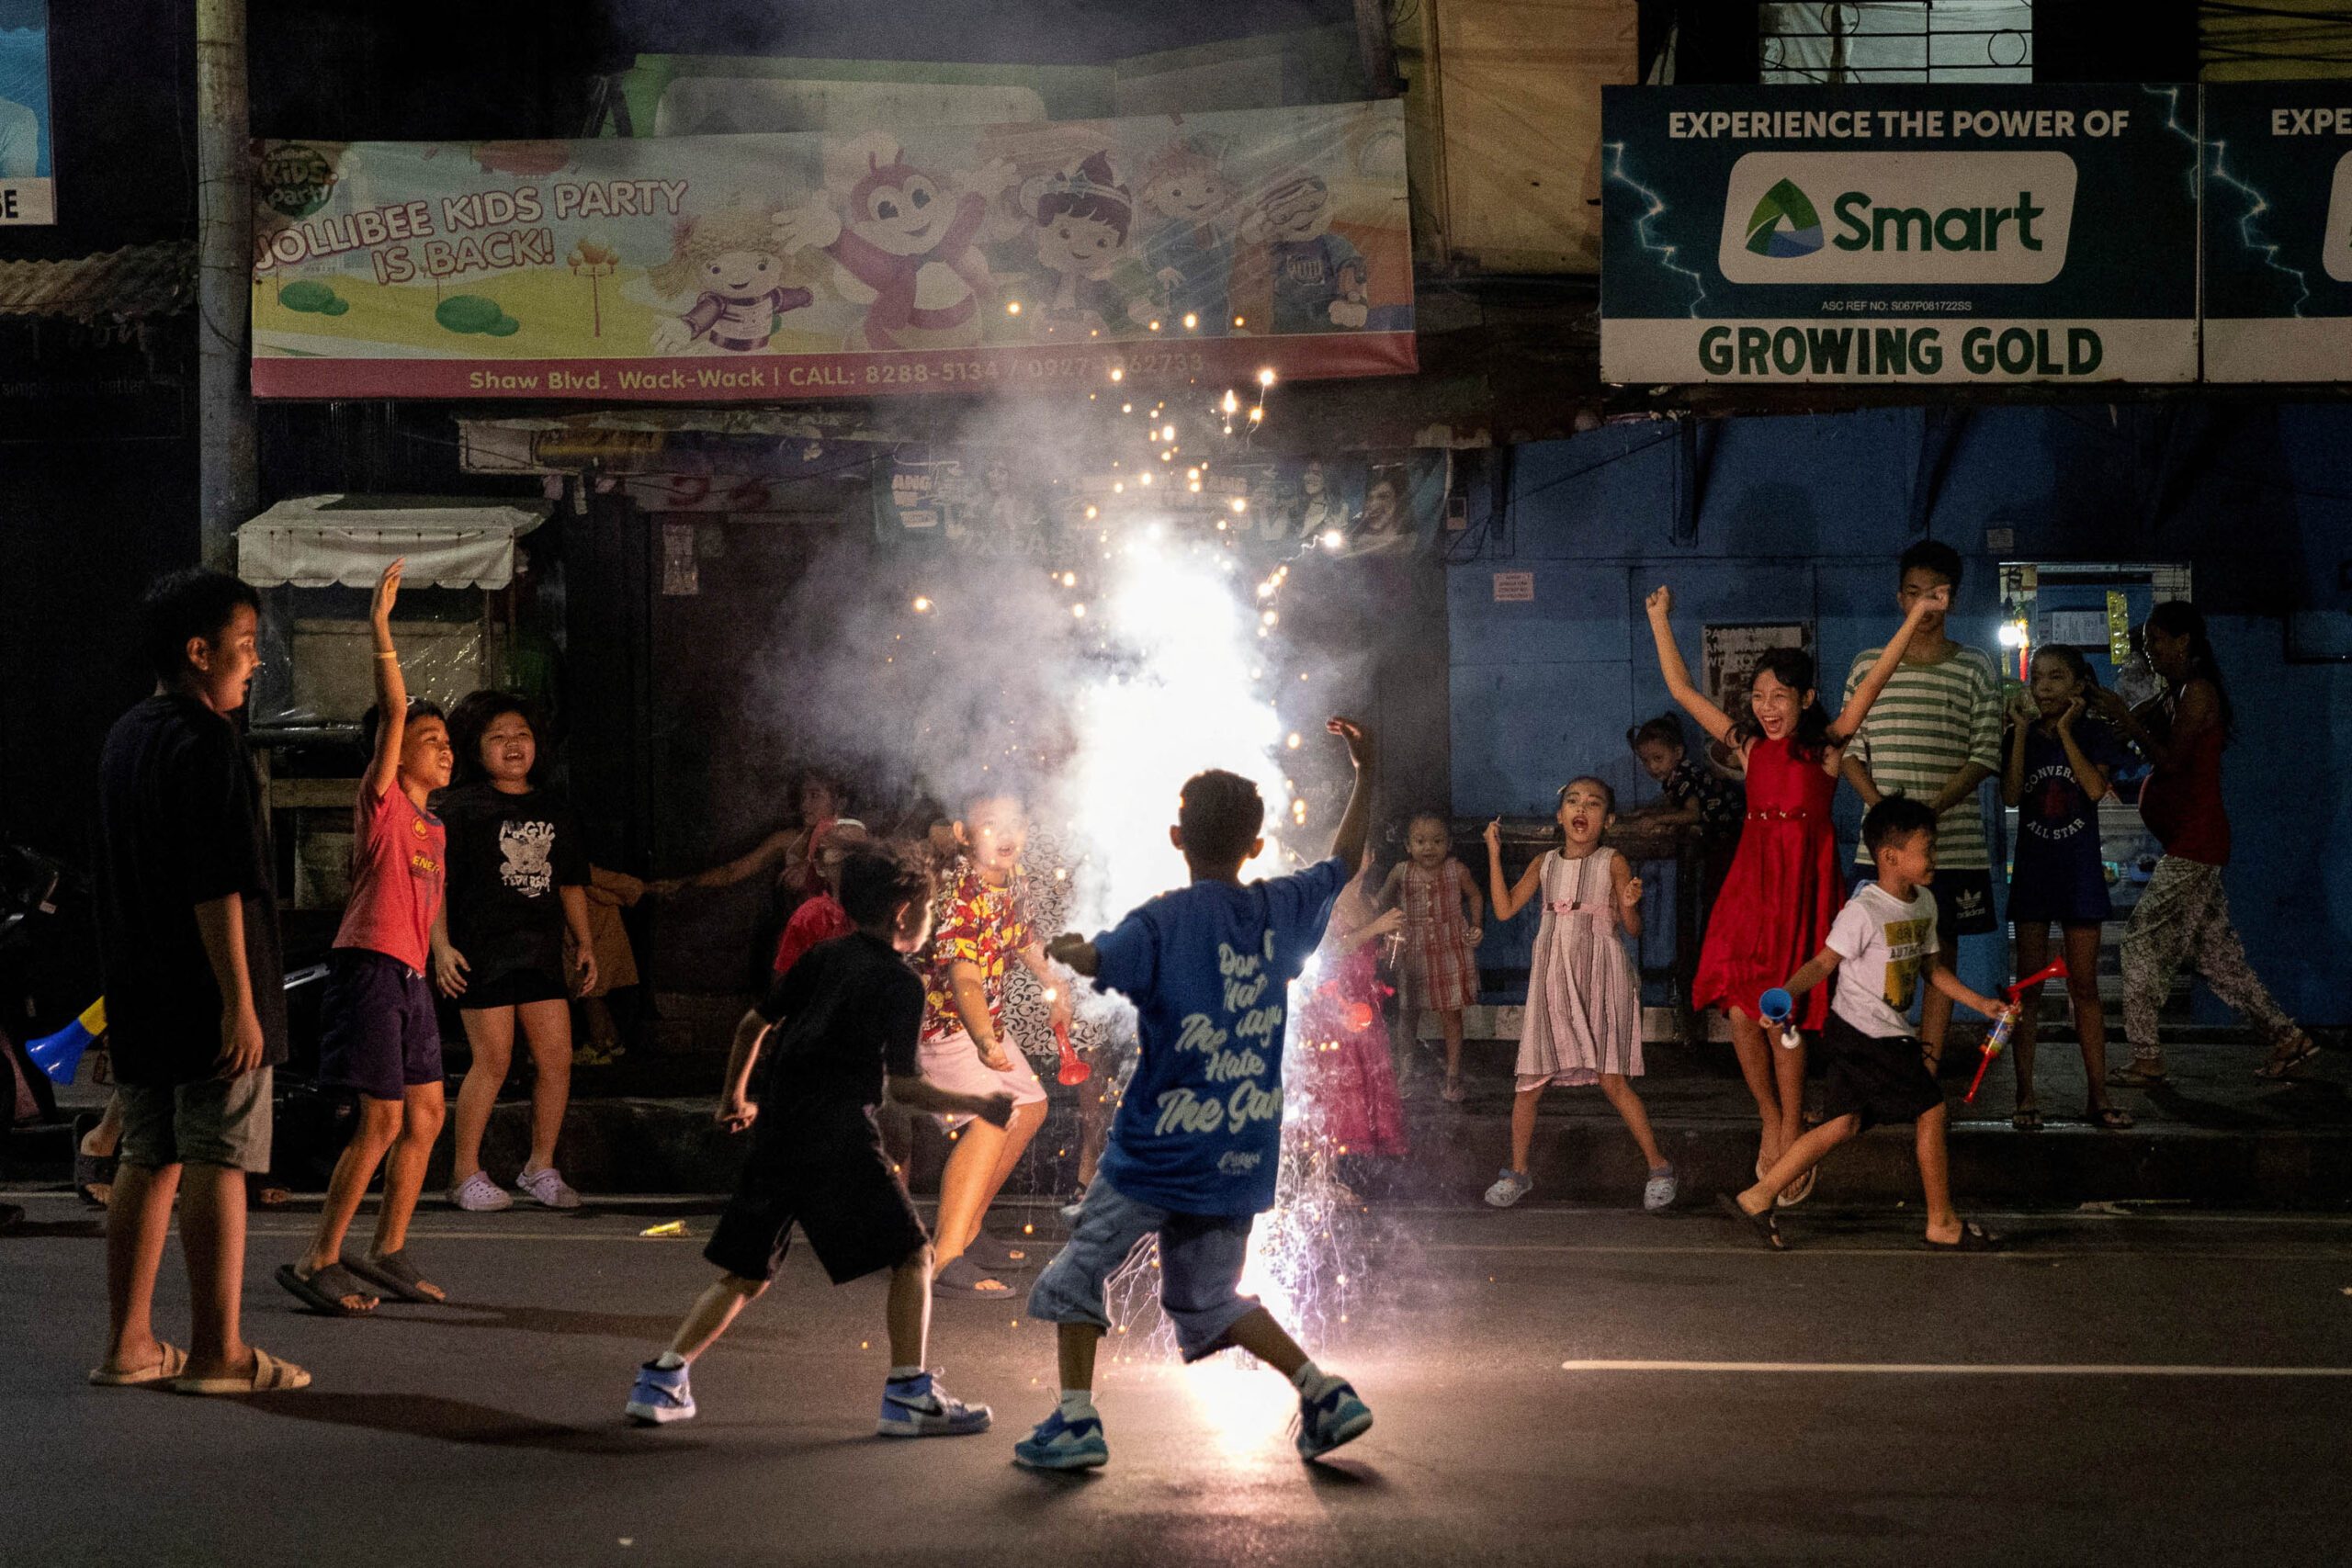 At least 116 injured due to firecracker-related injuries – DOH